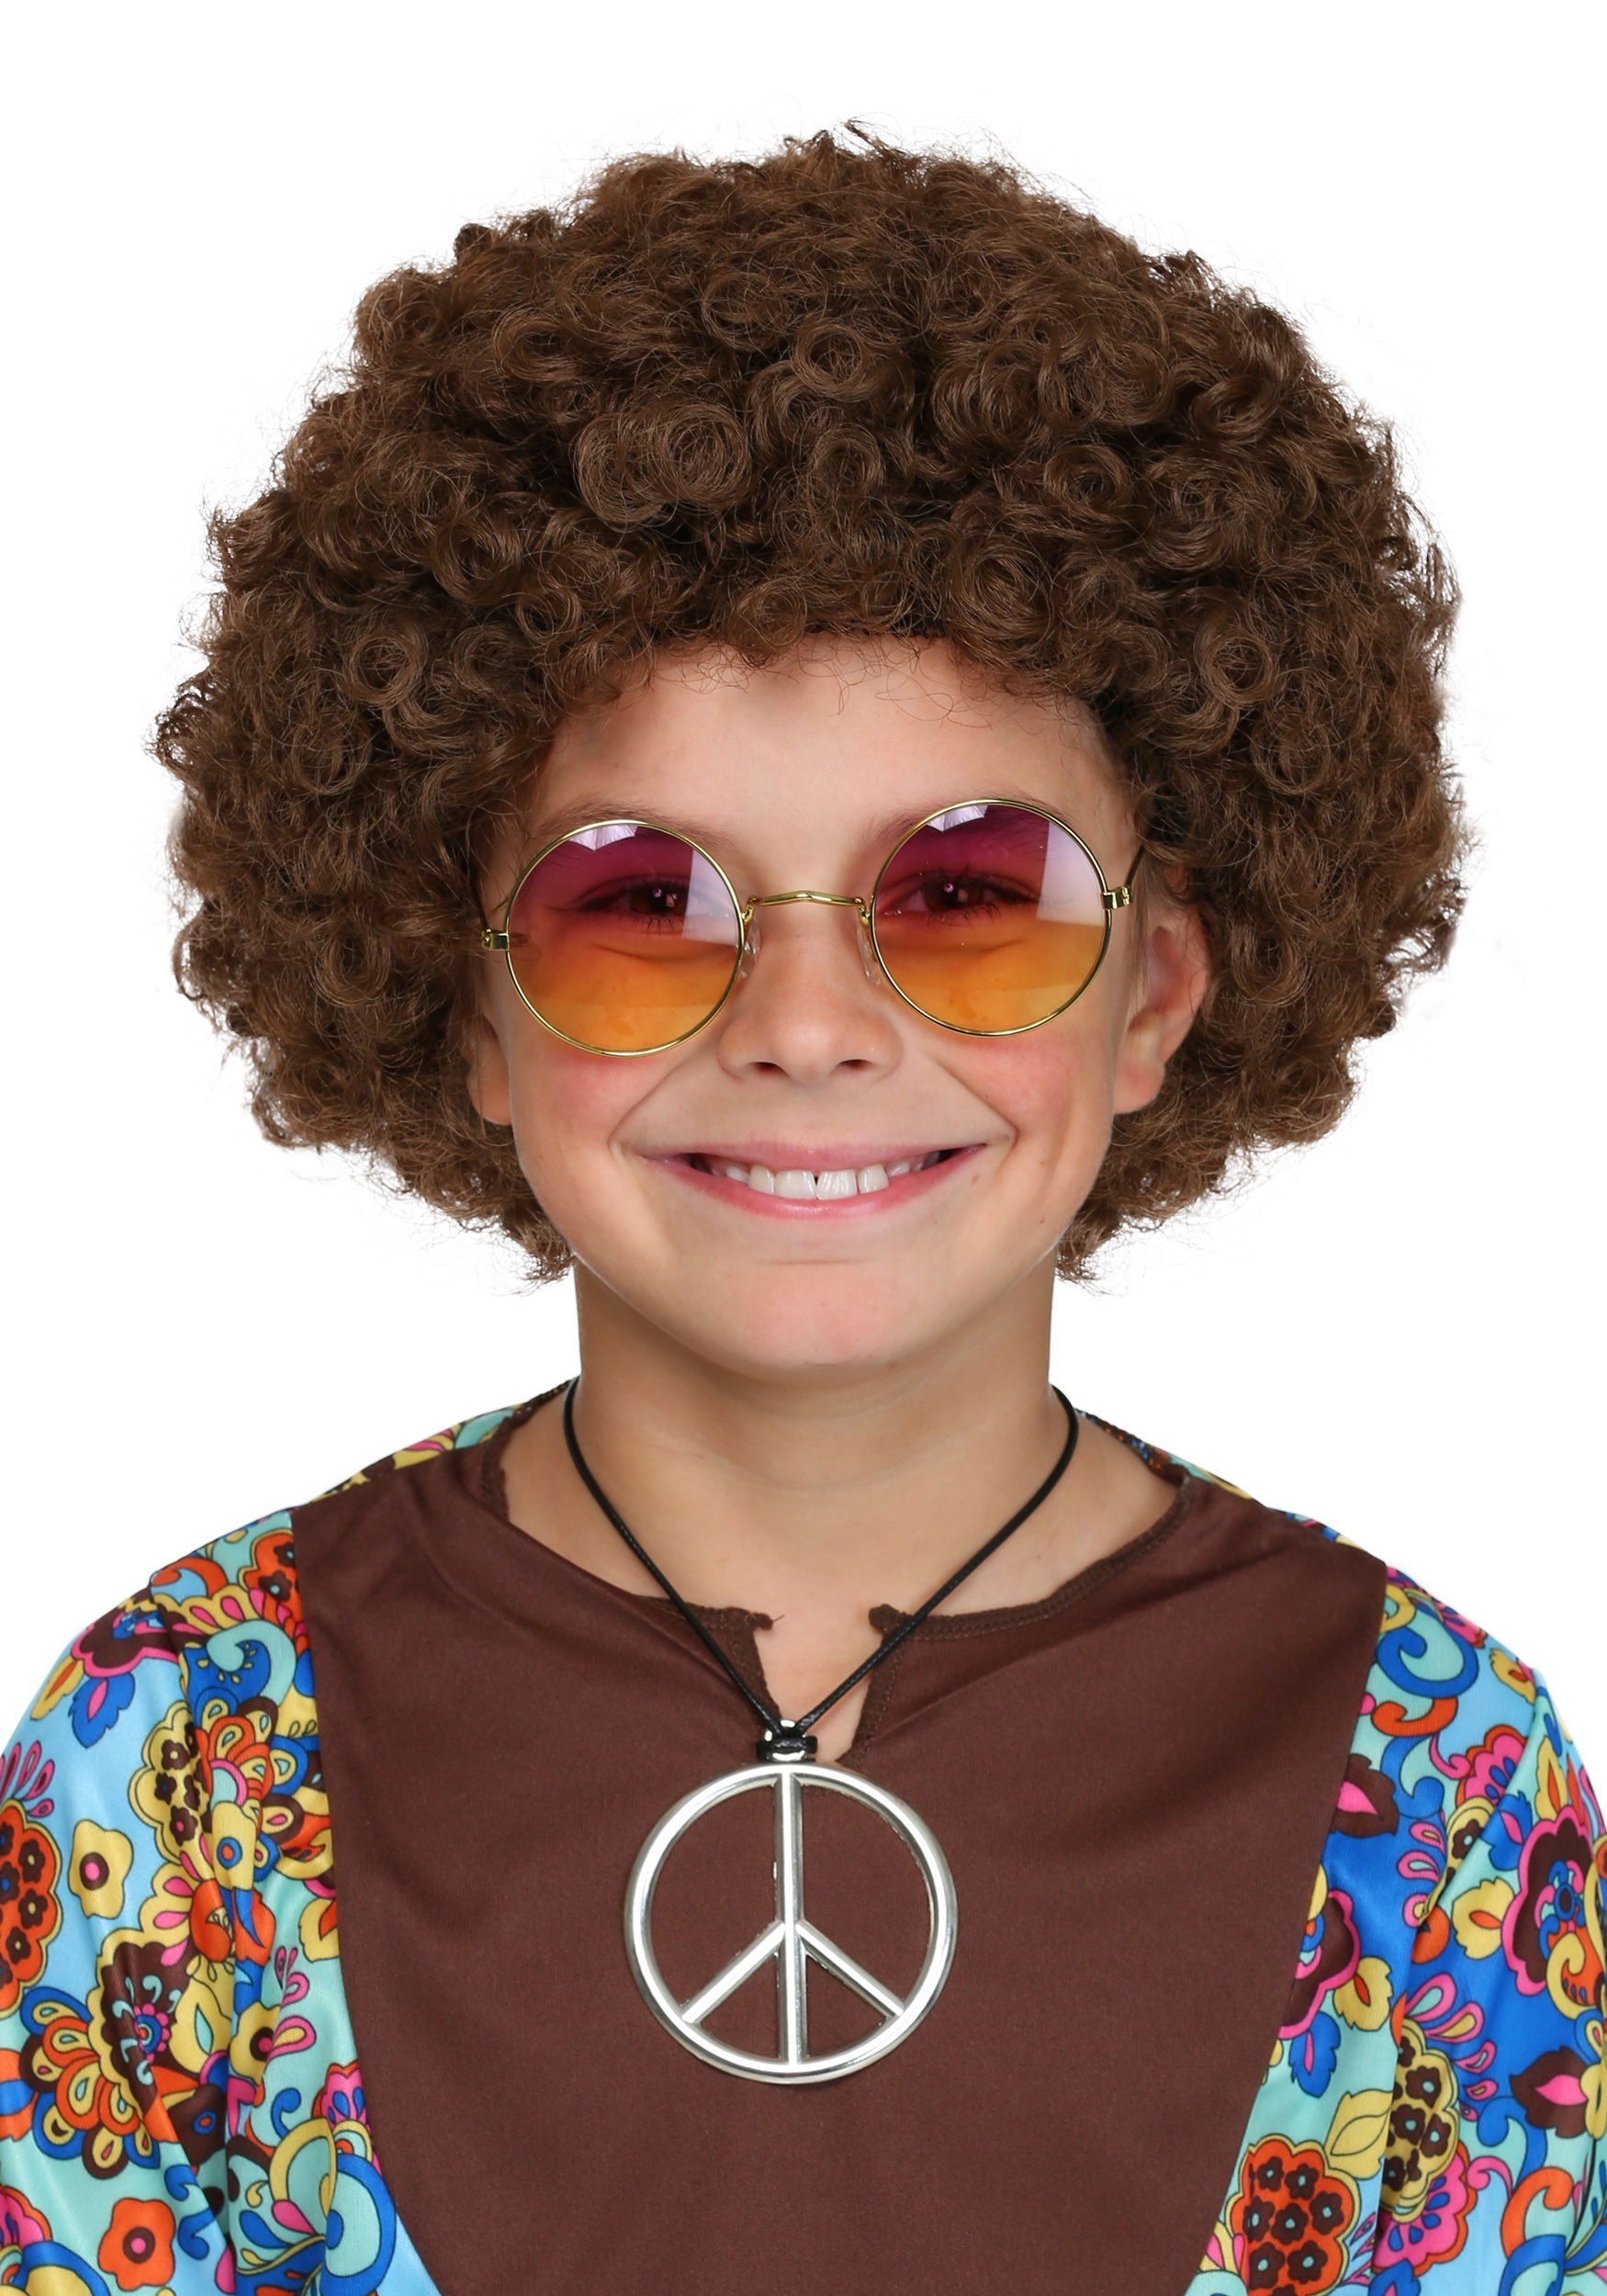 Kids Curly Afro Wig